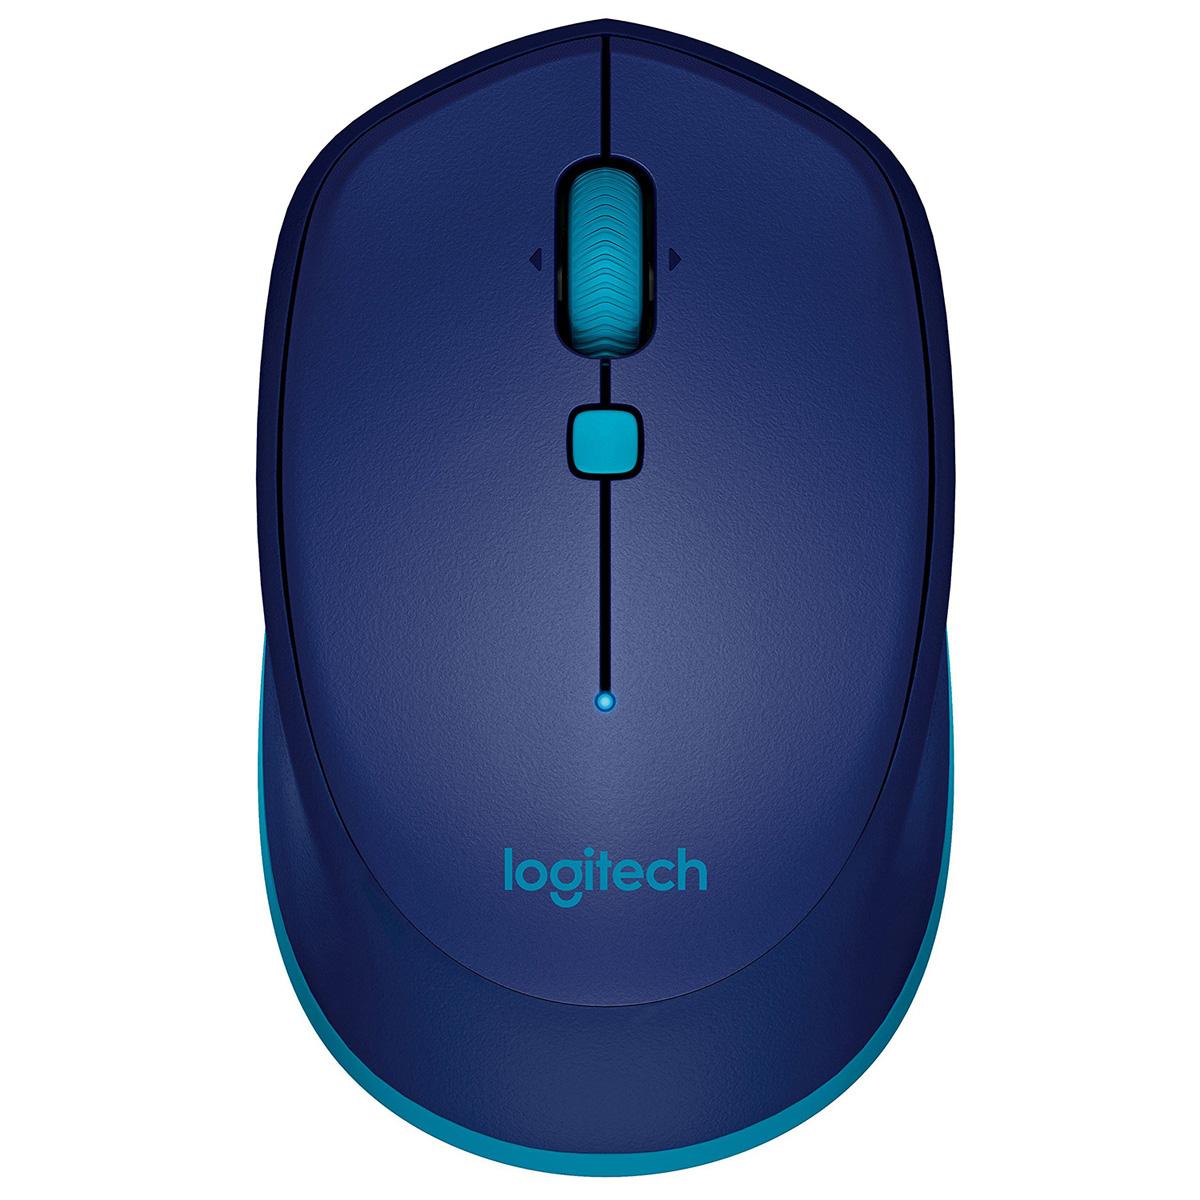 Logitech M535 Bluetooth Mouse for $19.99 Shipped